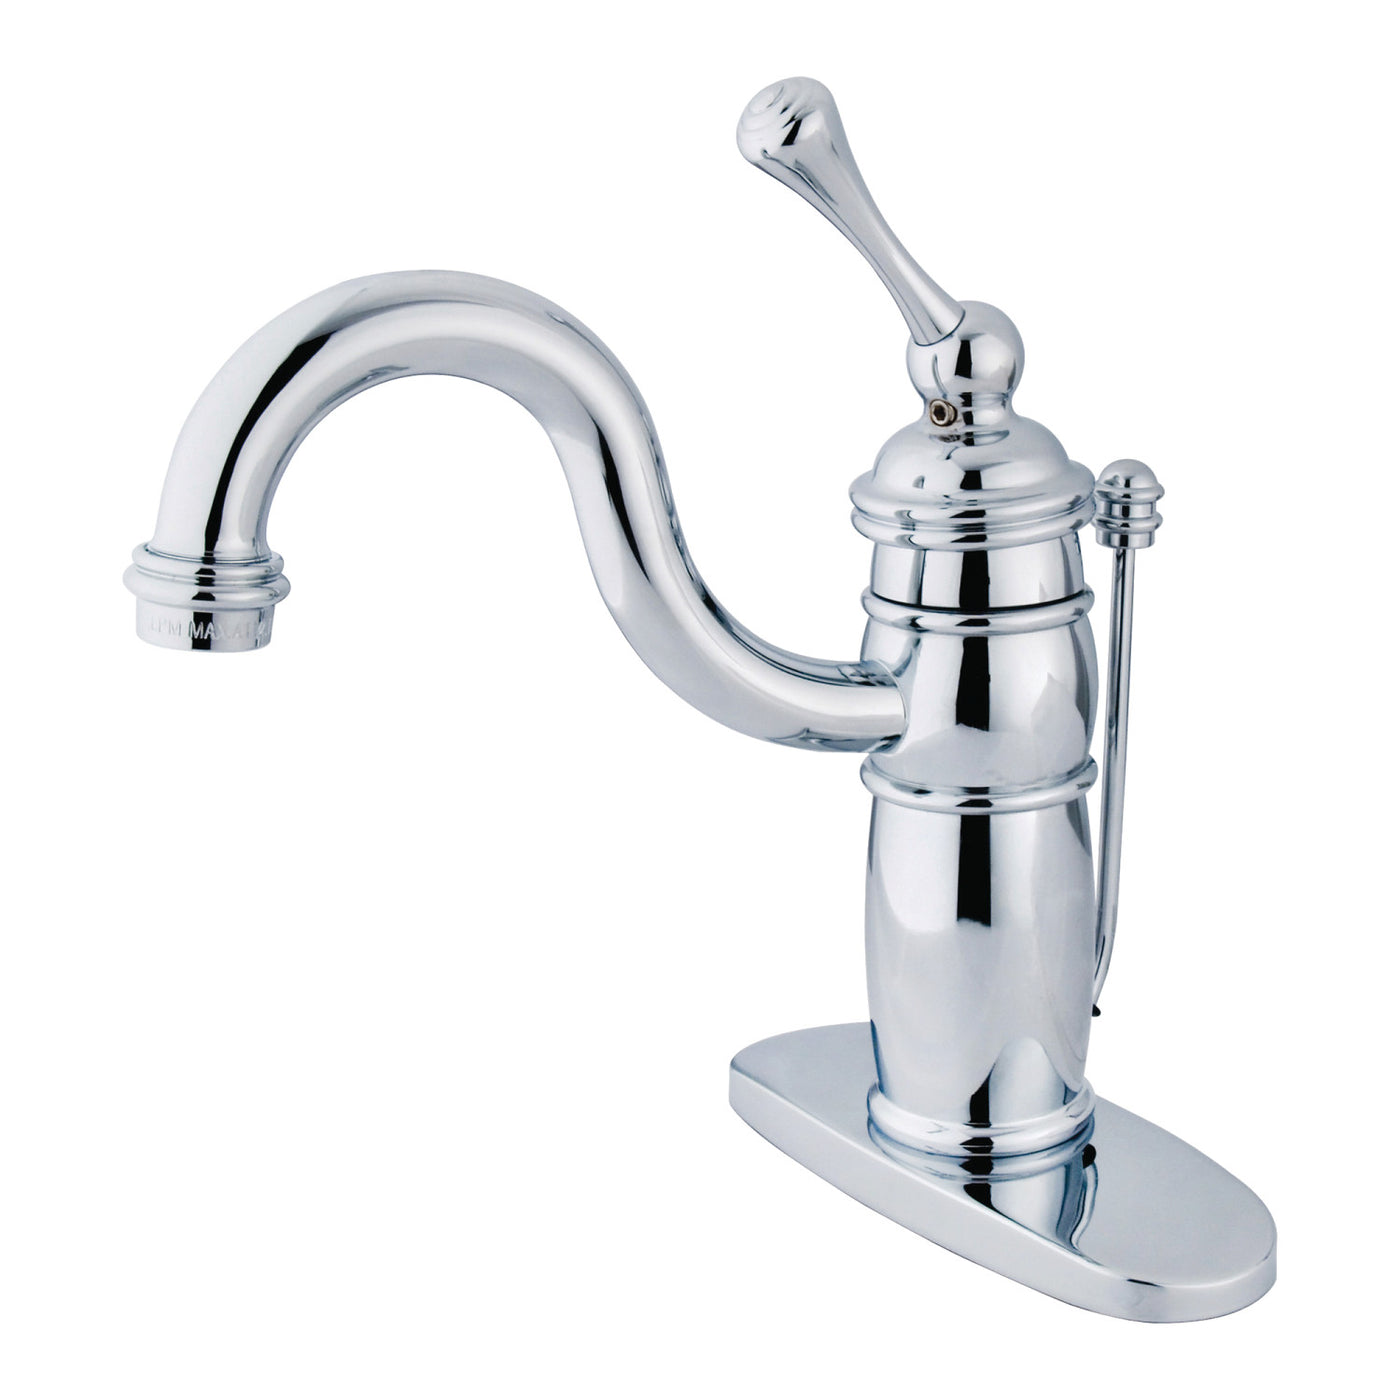 Elements of Design EB1401BL Single-Handle Bathroom Faucet with Pop-Up Drain, Polished Chrome